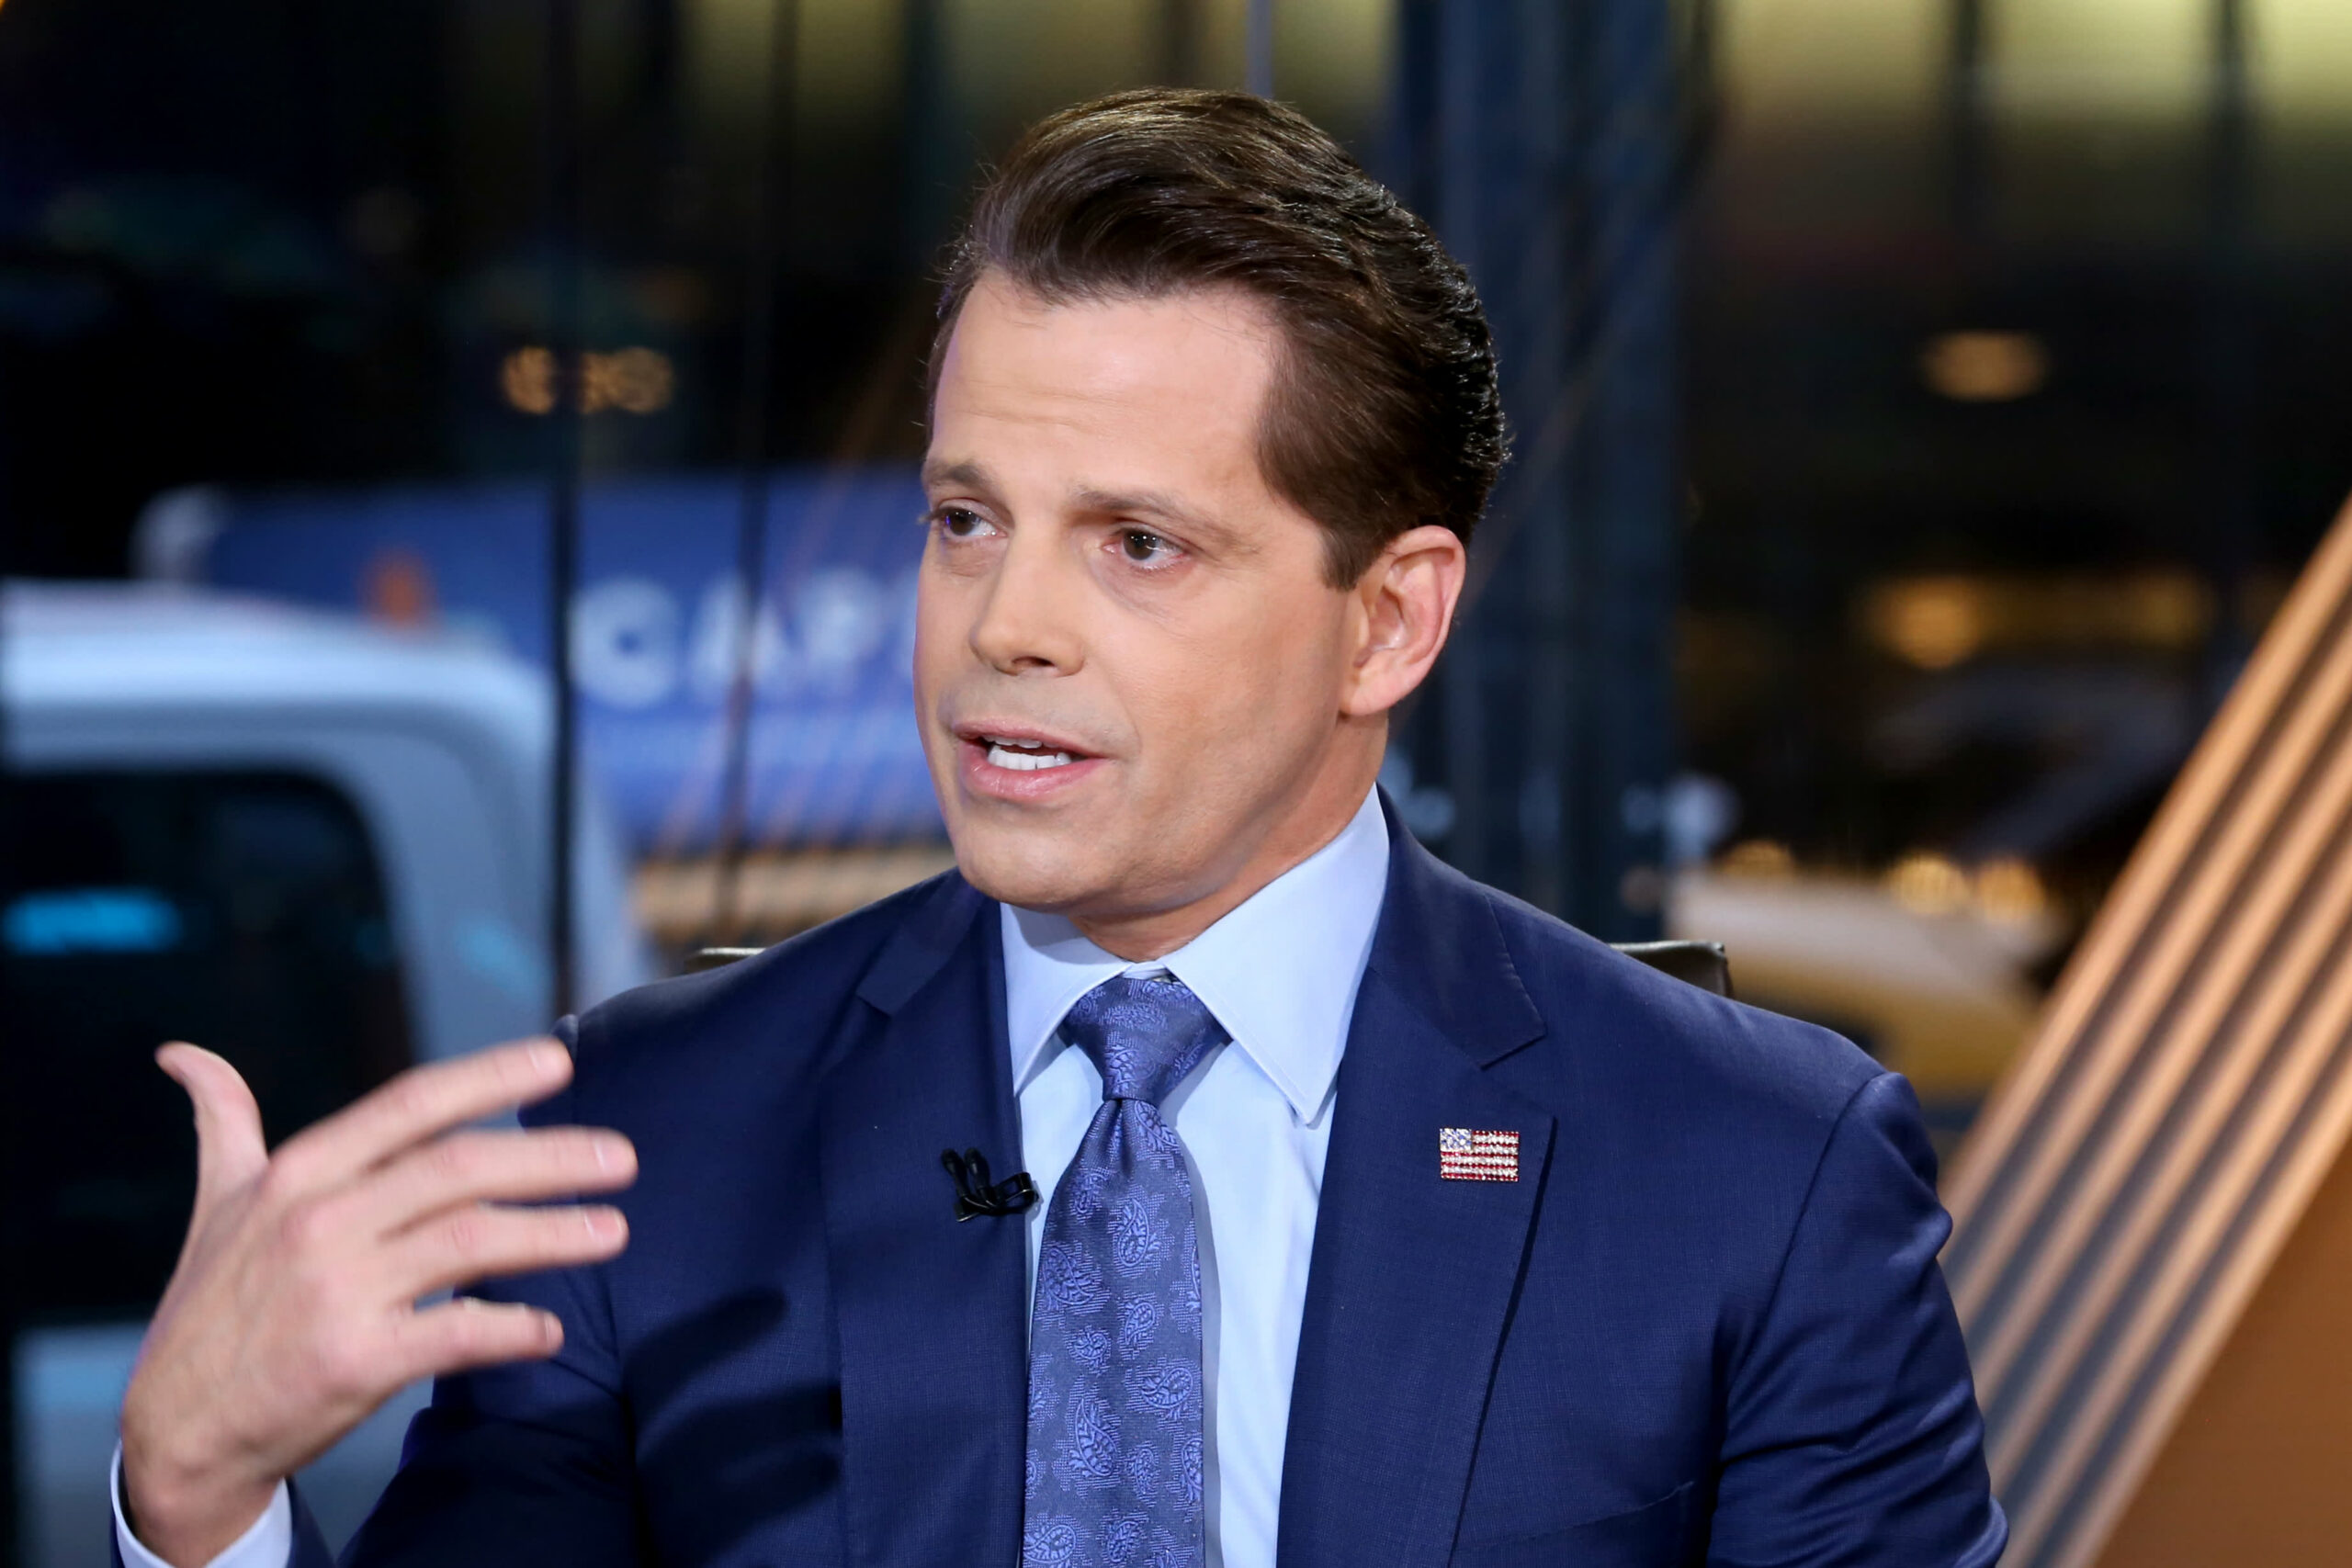 ‘Take a chill pill, stay long’ — Anthony Scaramucci says bitcoin’s recent plunge won’t last